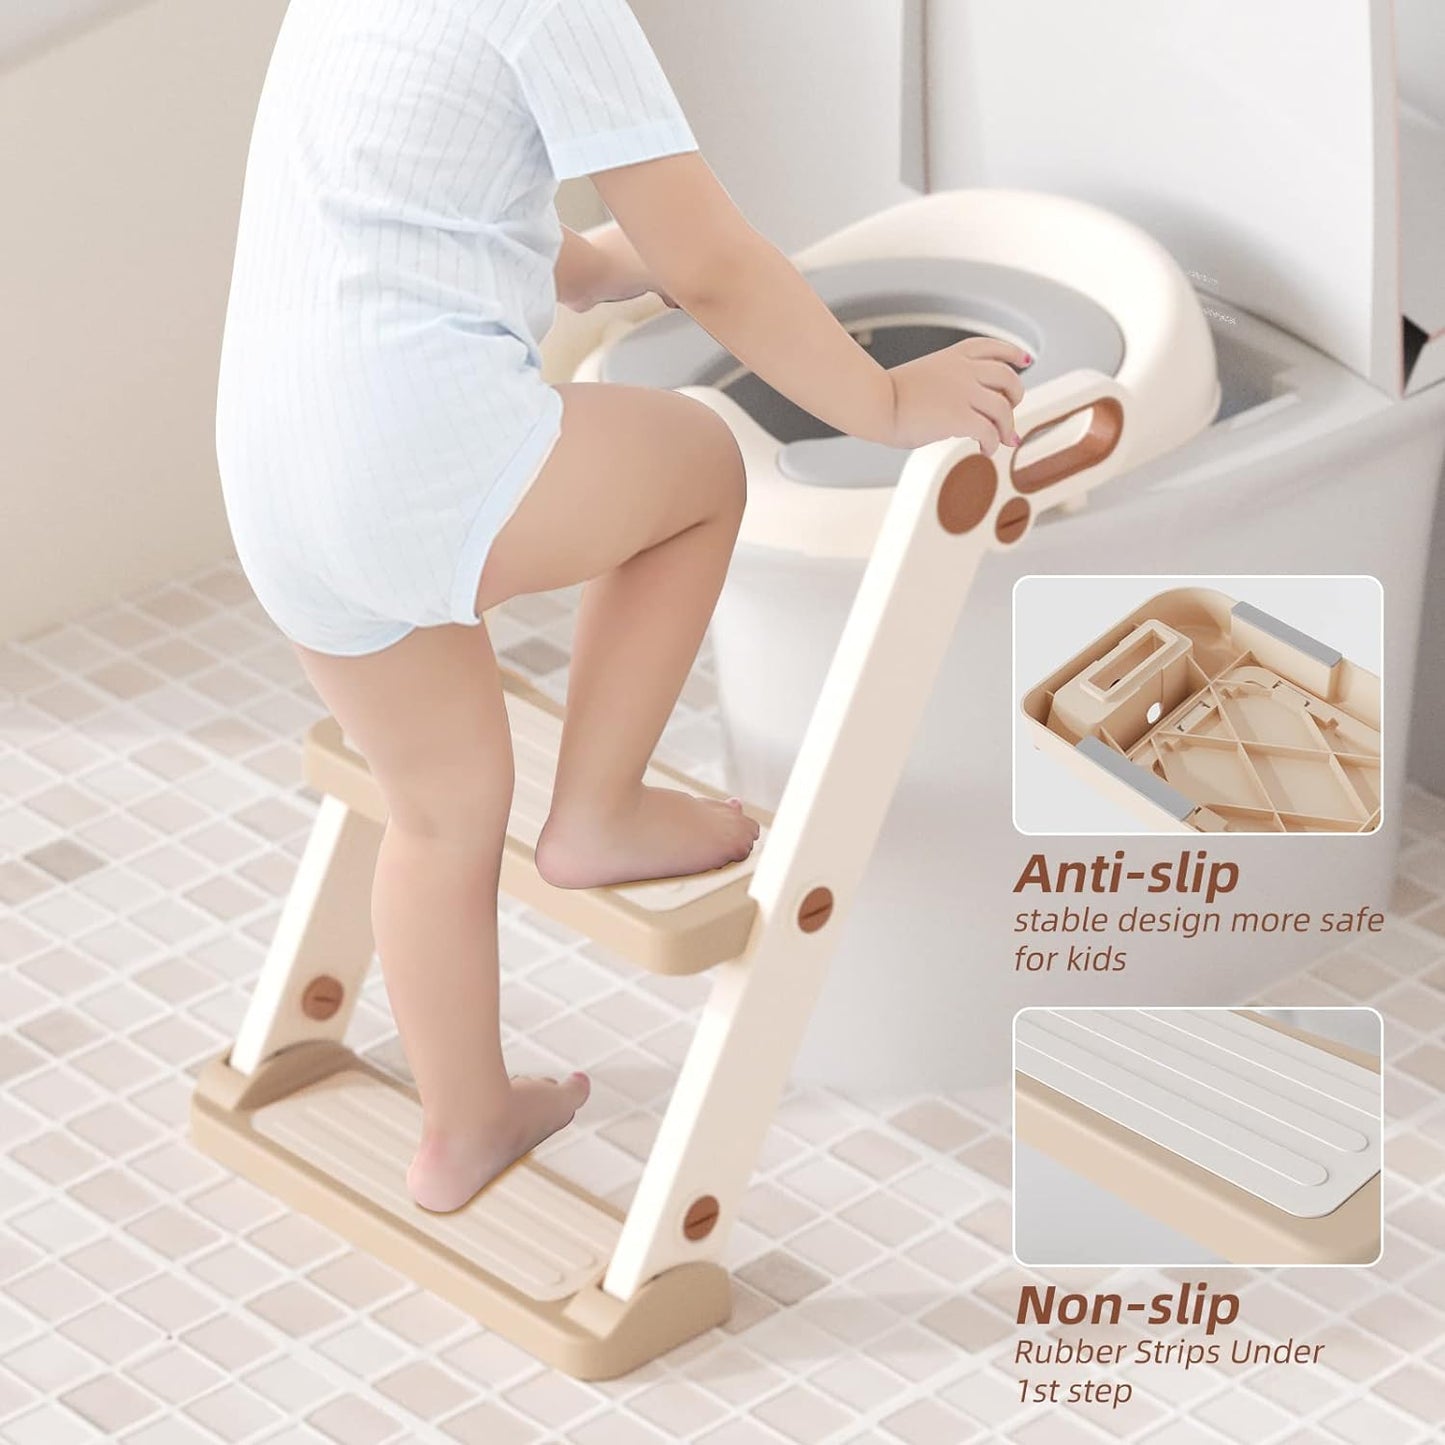 Potty Training Toilet for Toddler, Potty Toddler Toilet with Step Ladder for Kids Boys Girls Potty Training Seat Adjustable Comfortable PU Safe Potty Seat with Anti-Slip Pads (Gold)